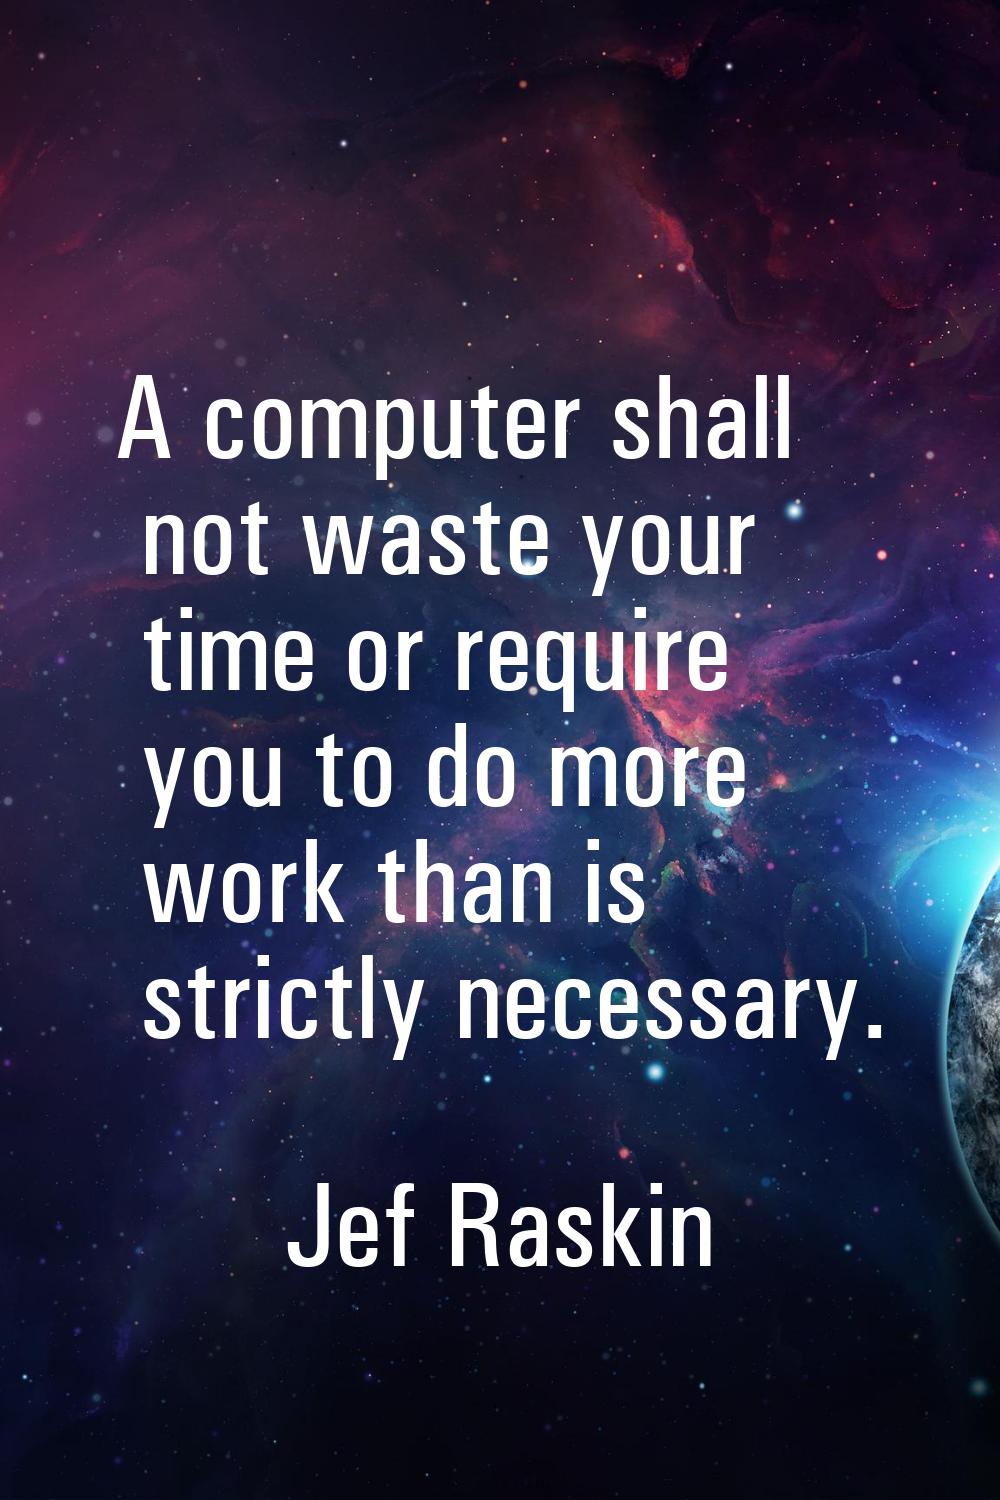 A computer shall not waste your time or require you to do more work than is strictly necessary.